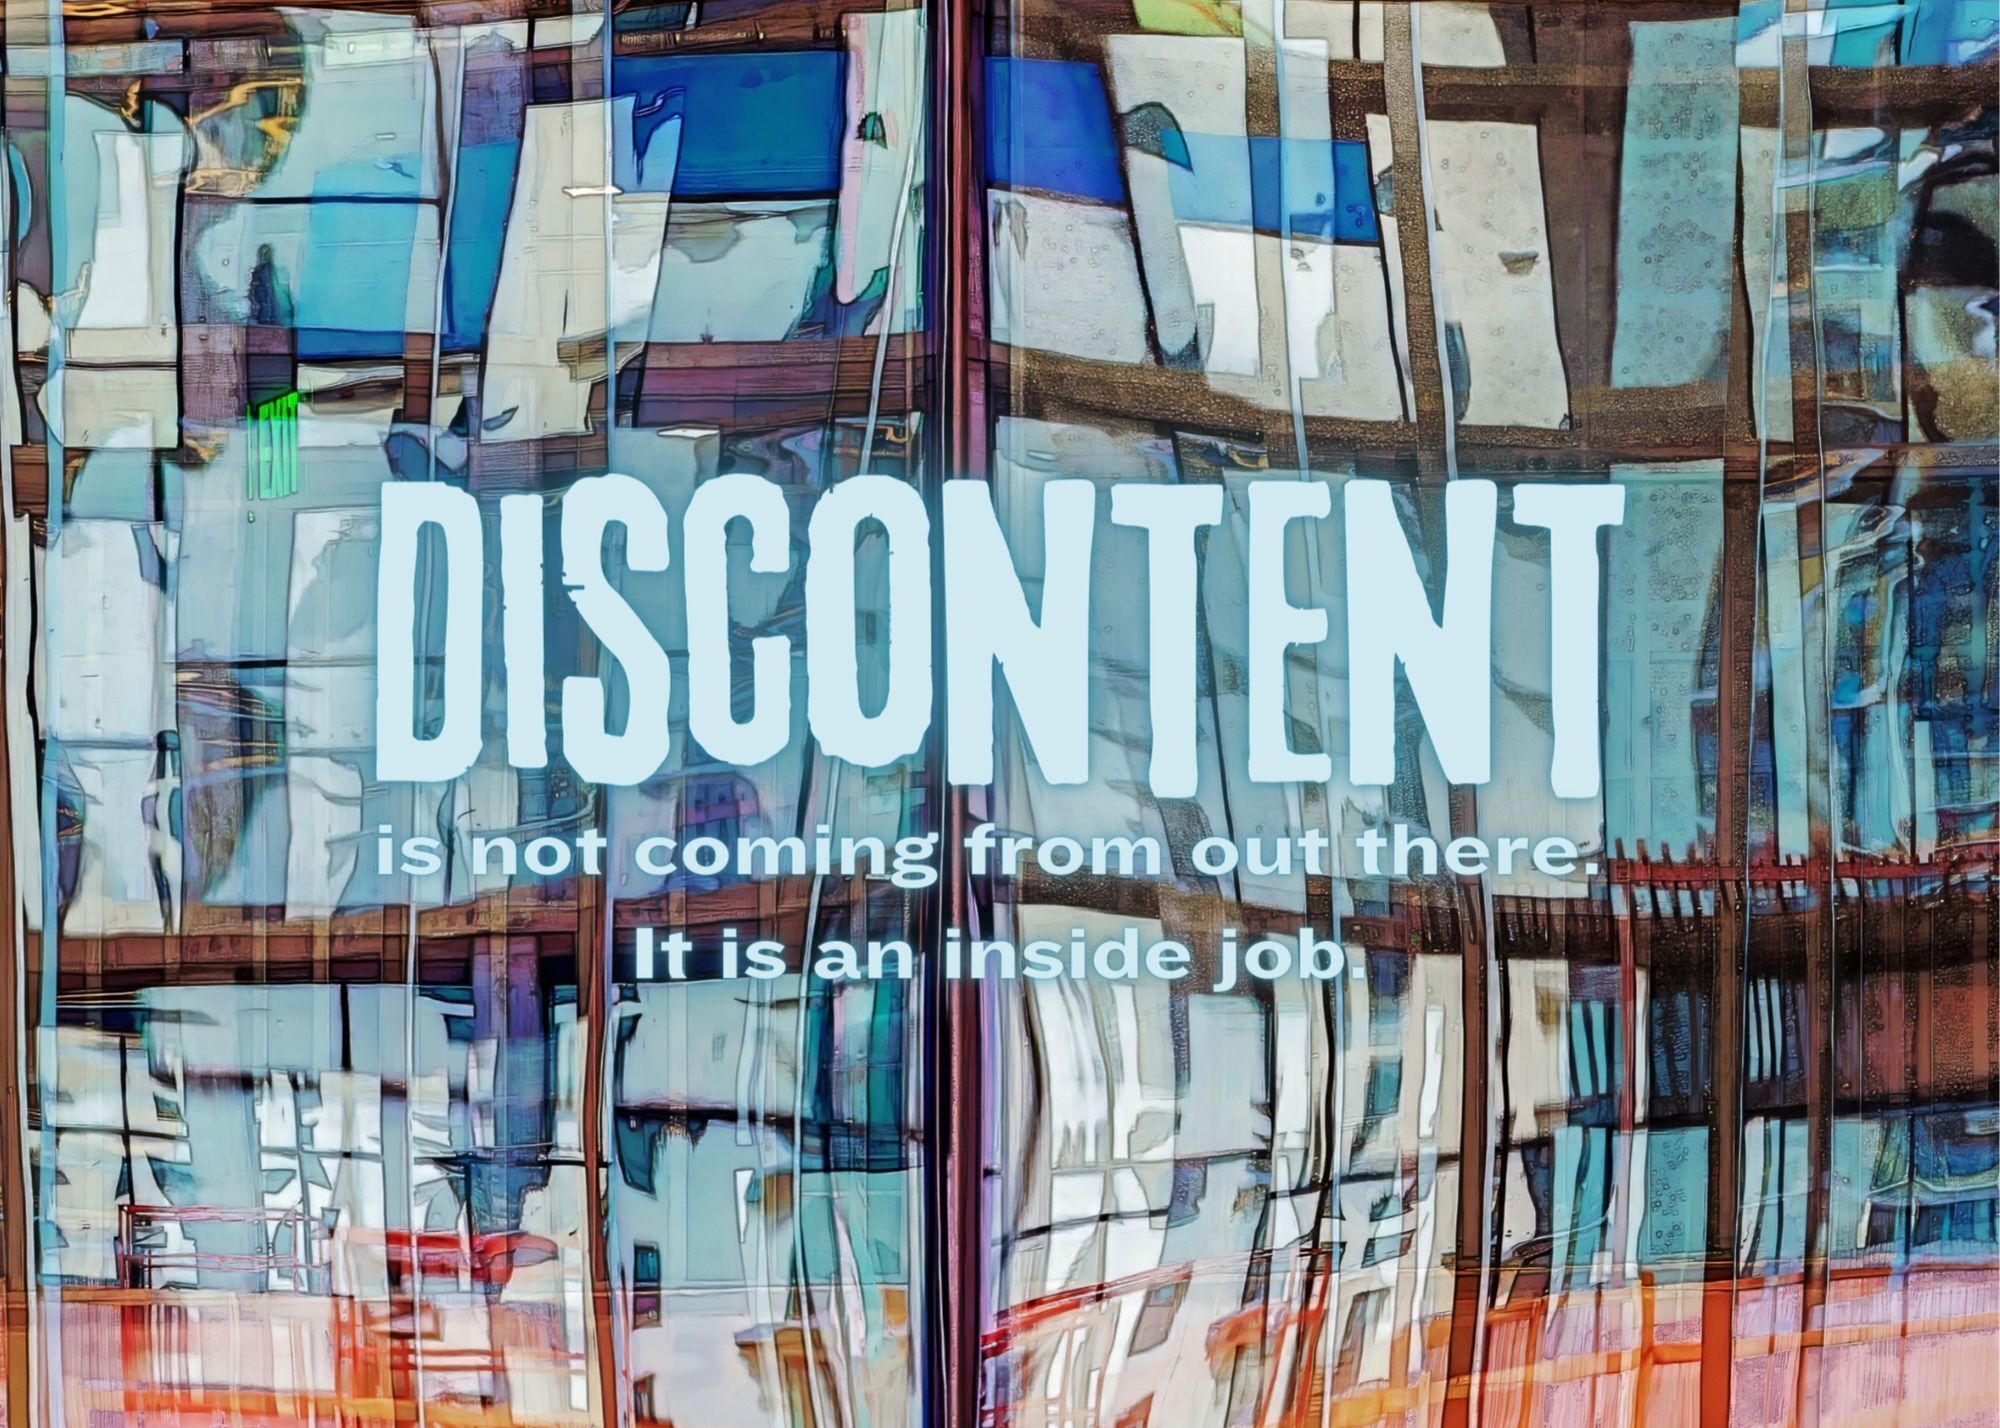 Reflection photo with quote about understanding discontent.